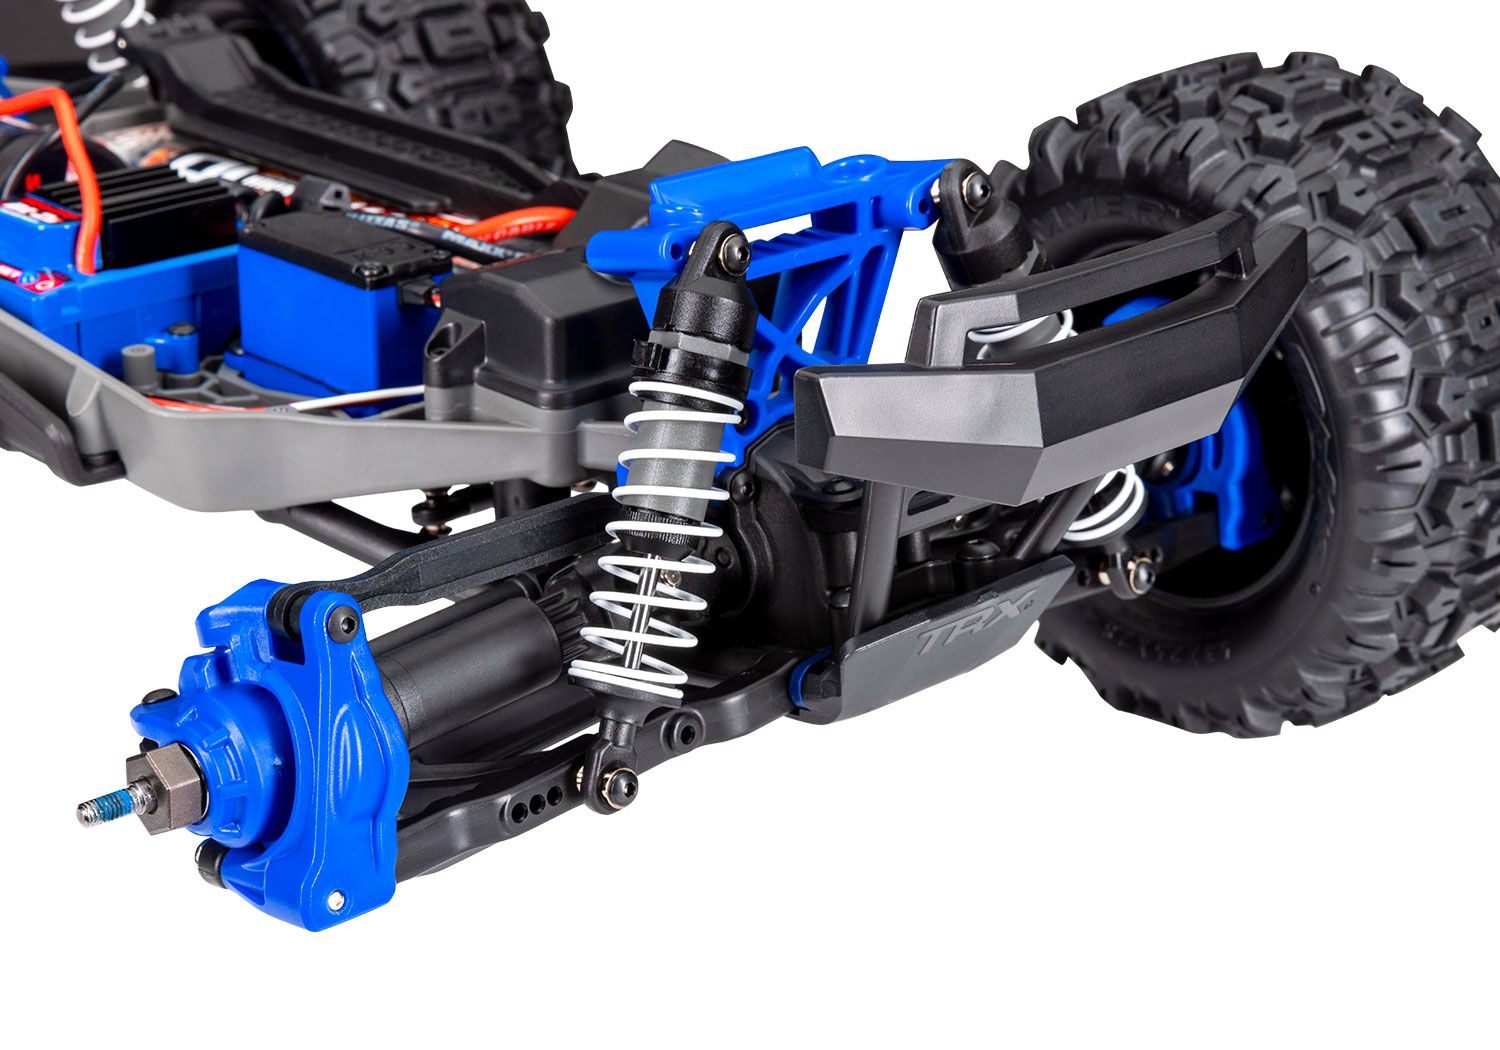 TRAXXAS STAMPEDE 4X4 BRUSHLESS 2S + HD PARTS (BLEU)